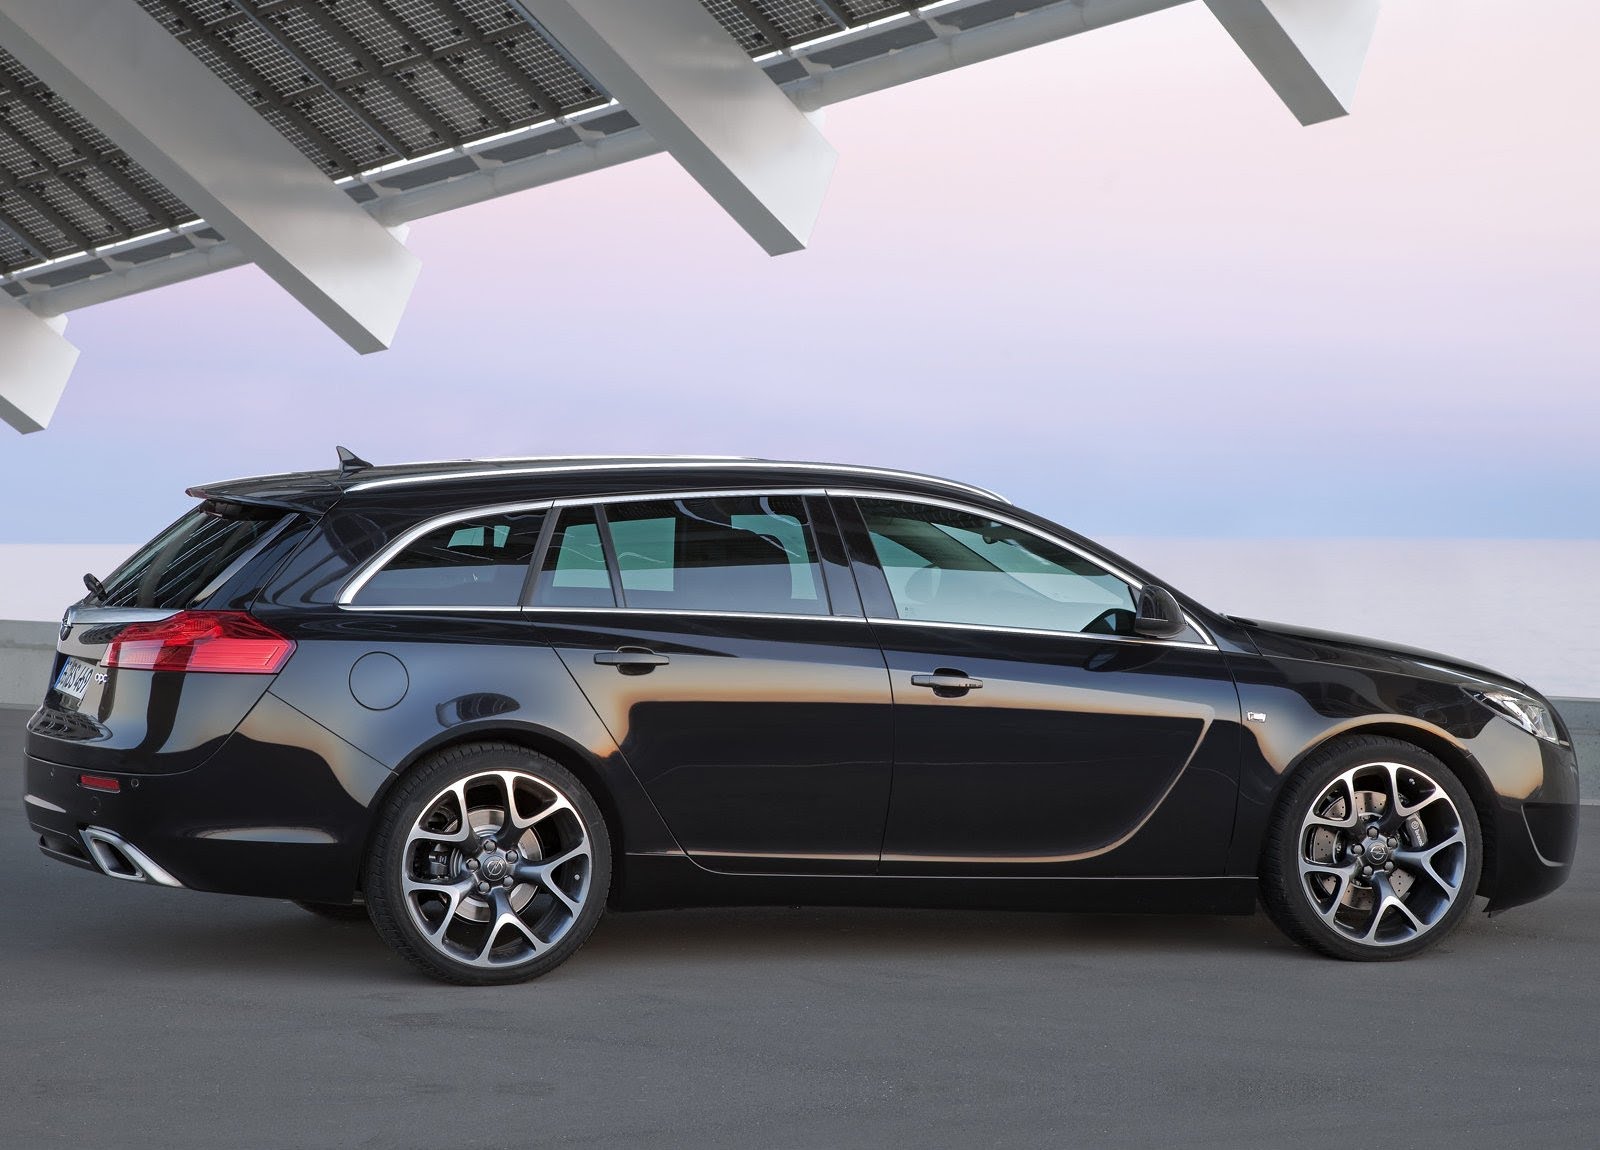 2014 Opel Insignia OPC Sports Tourer Backgrounds on Wallpapers Vista